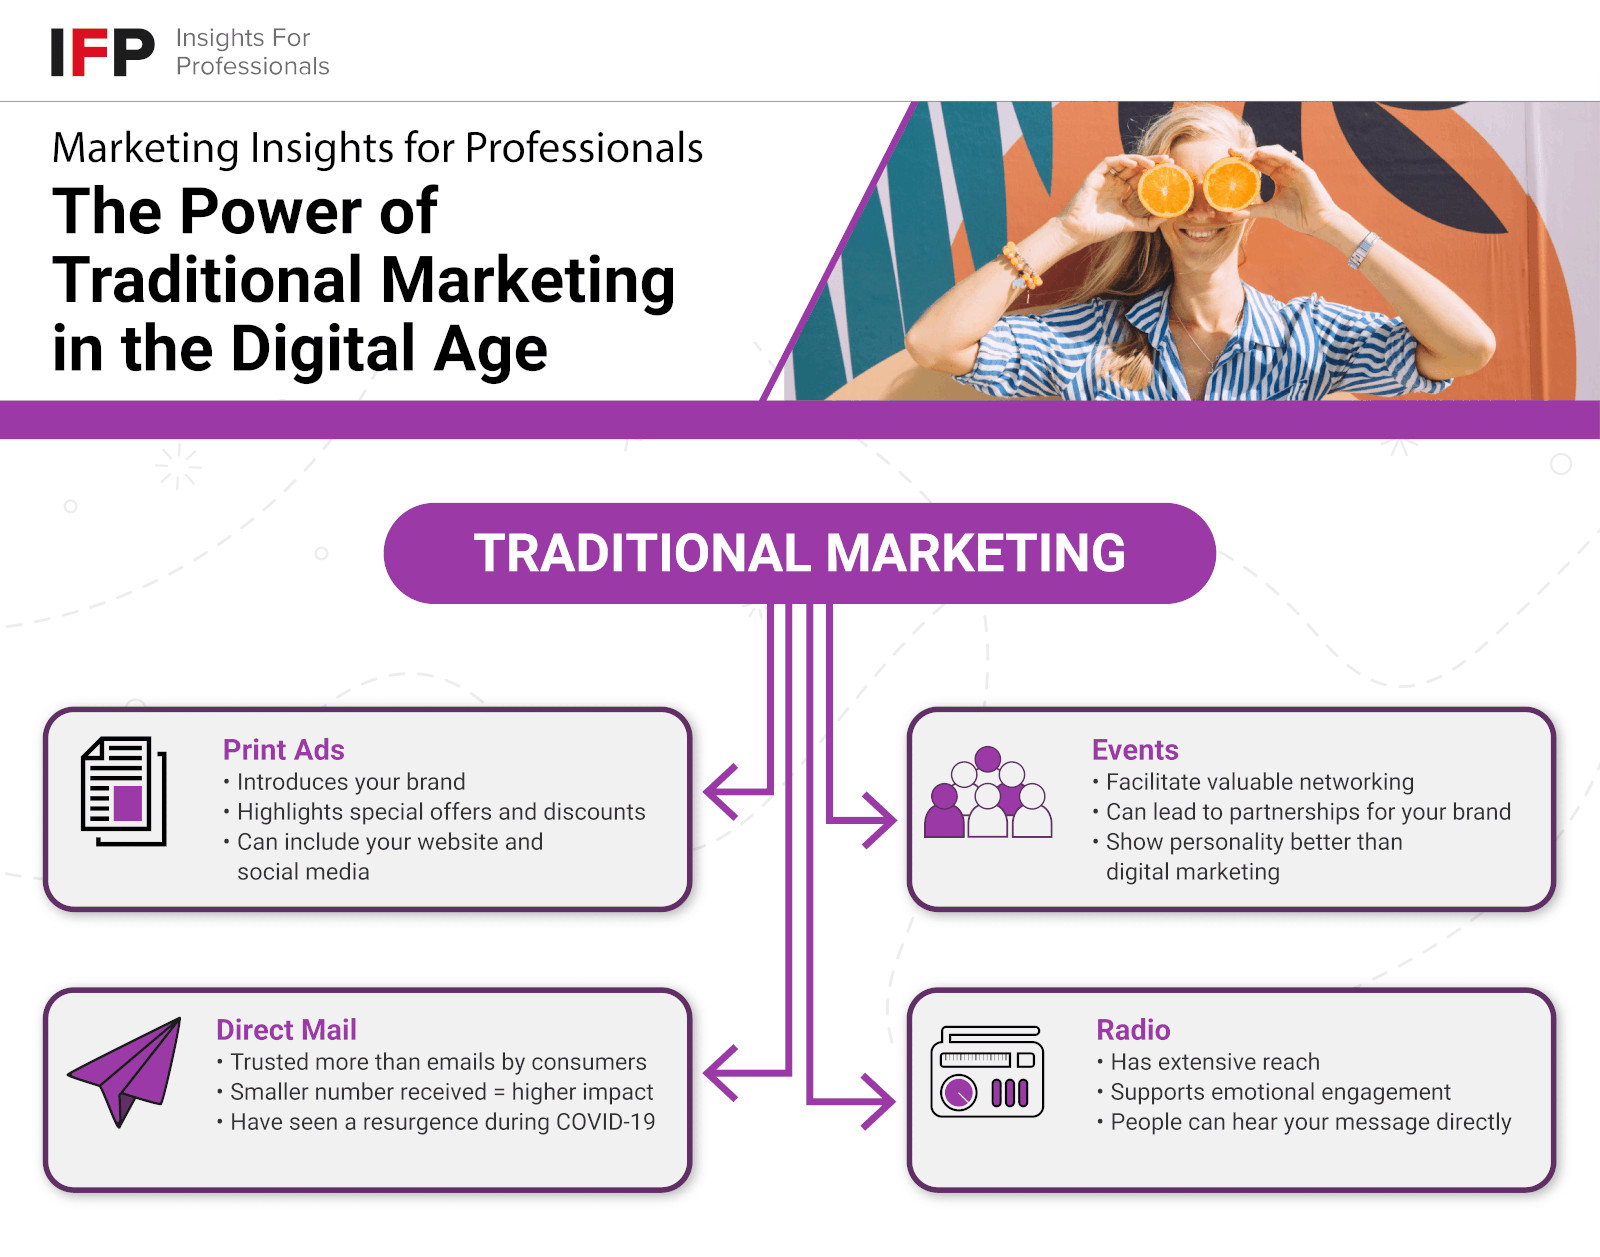 IFP the key benefits of each traditional marketing method in today's digital world